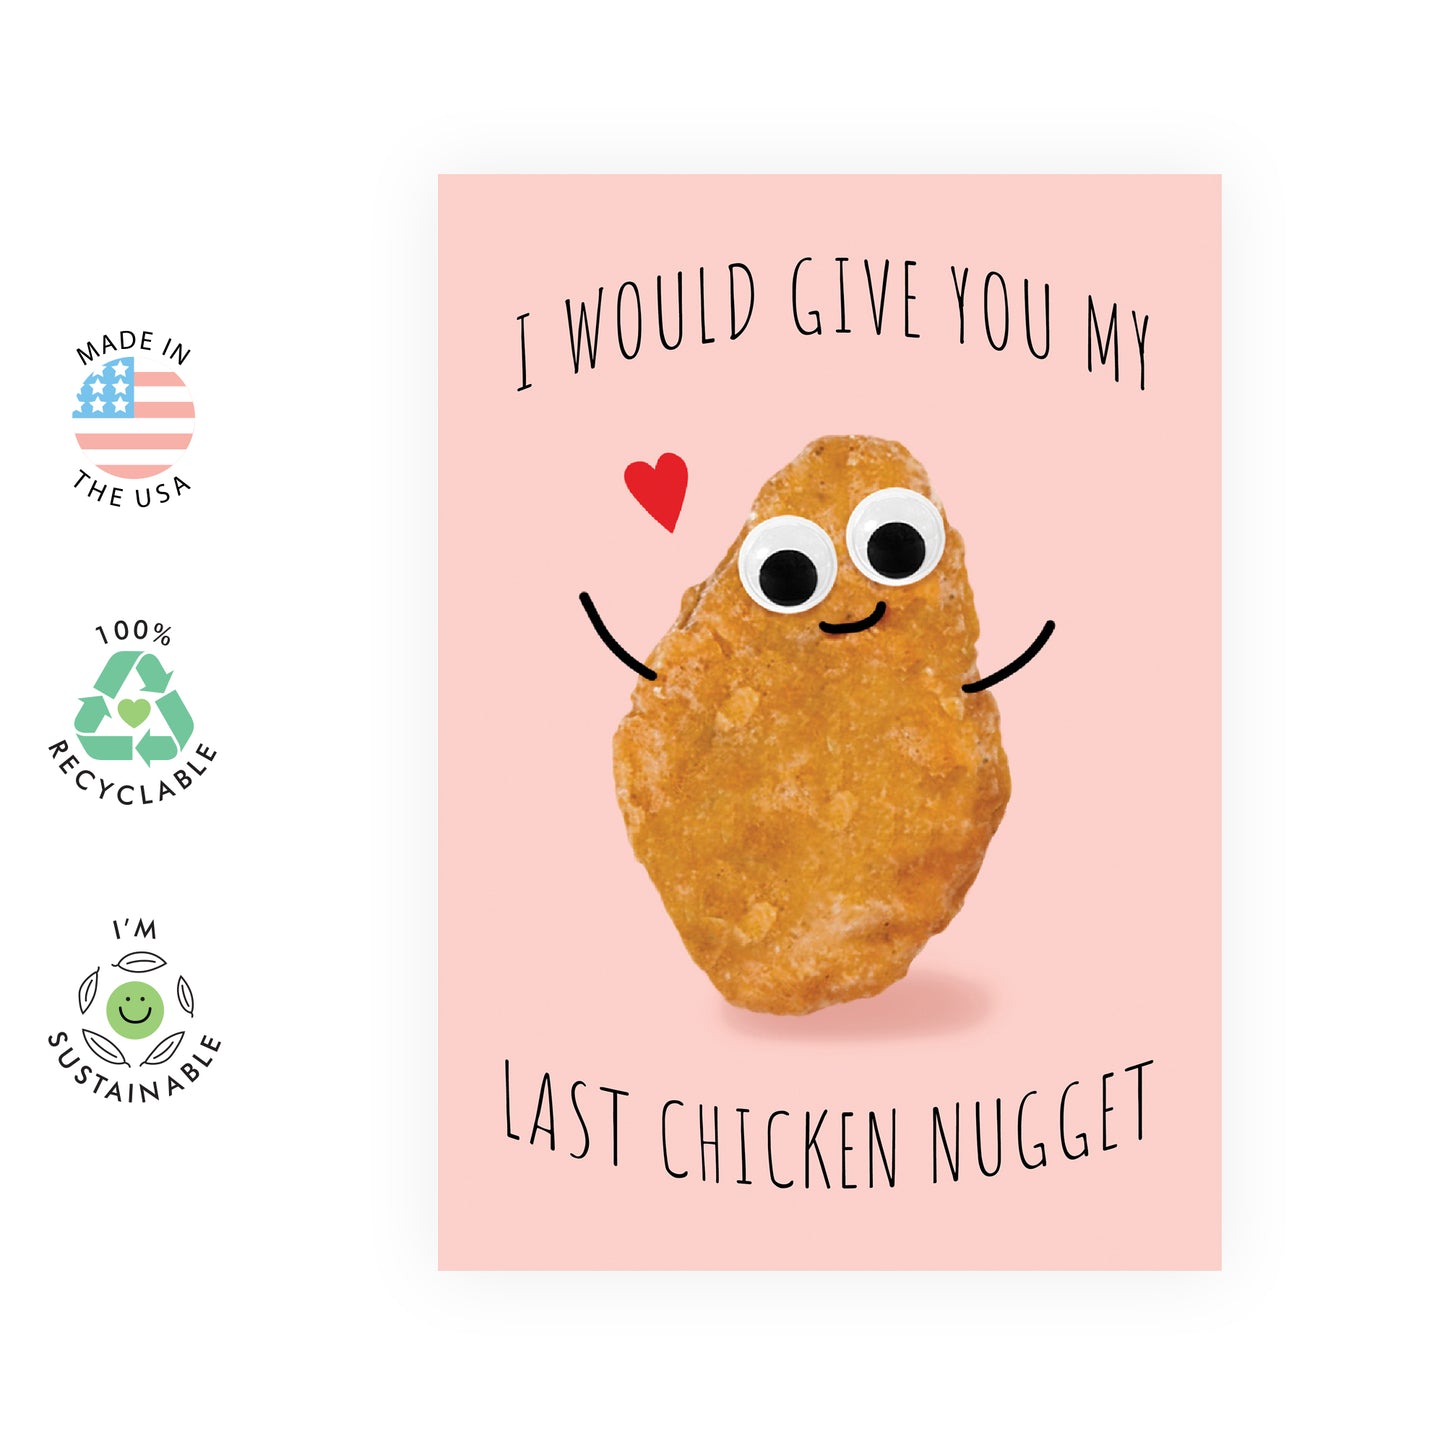 Cute Anniversary Card - I Would Give You My Last Chicken Nugget - For Men Women Him Her